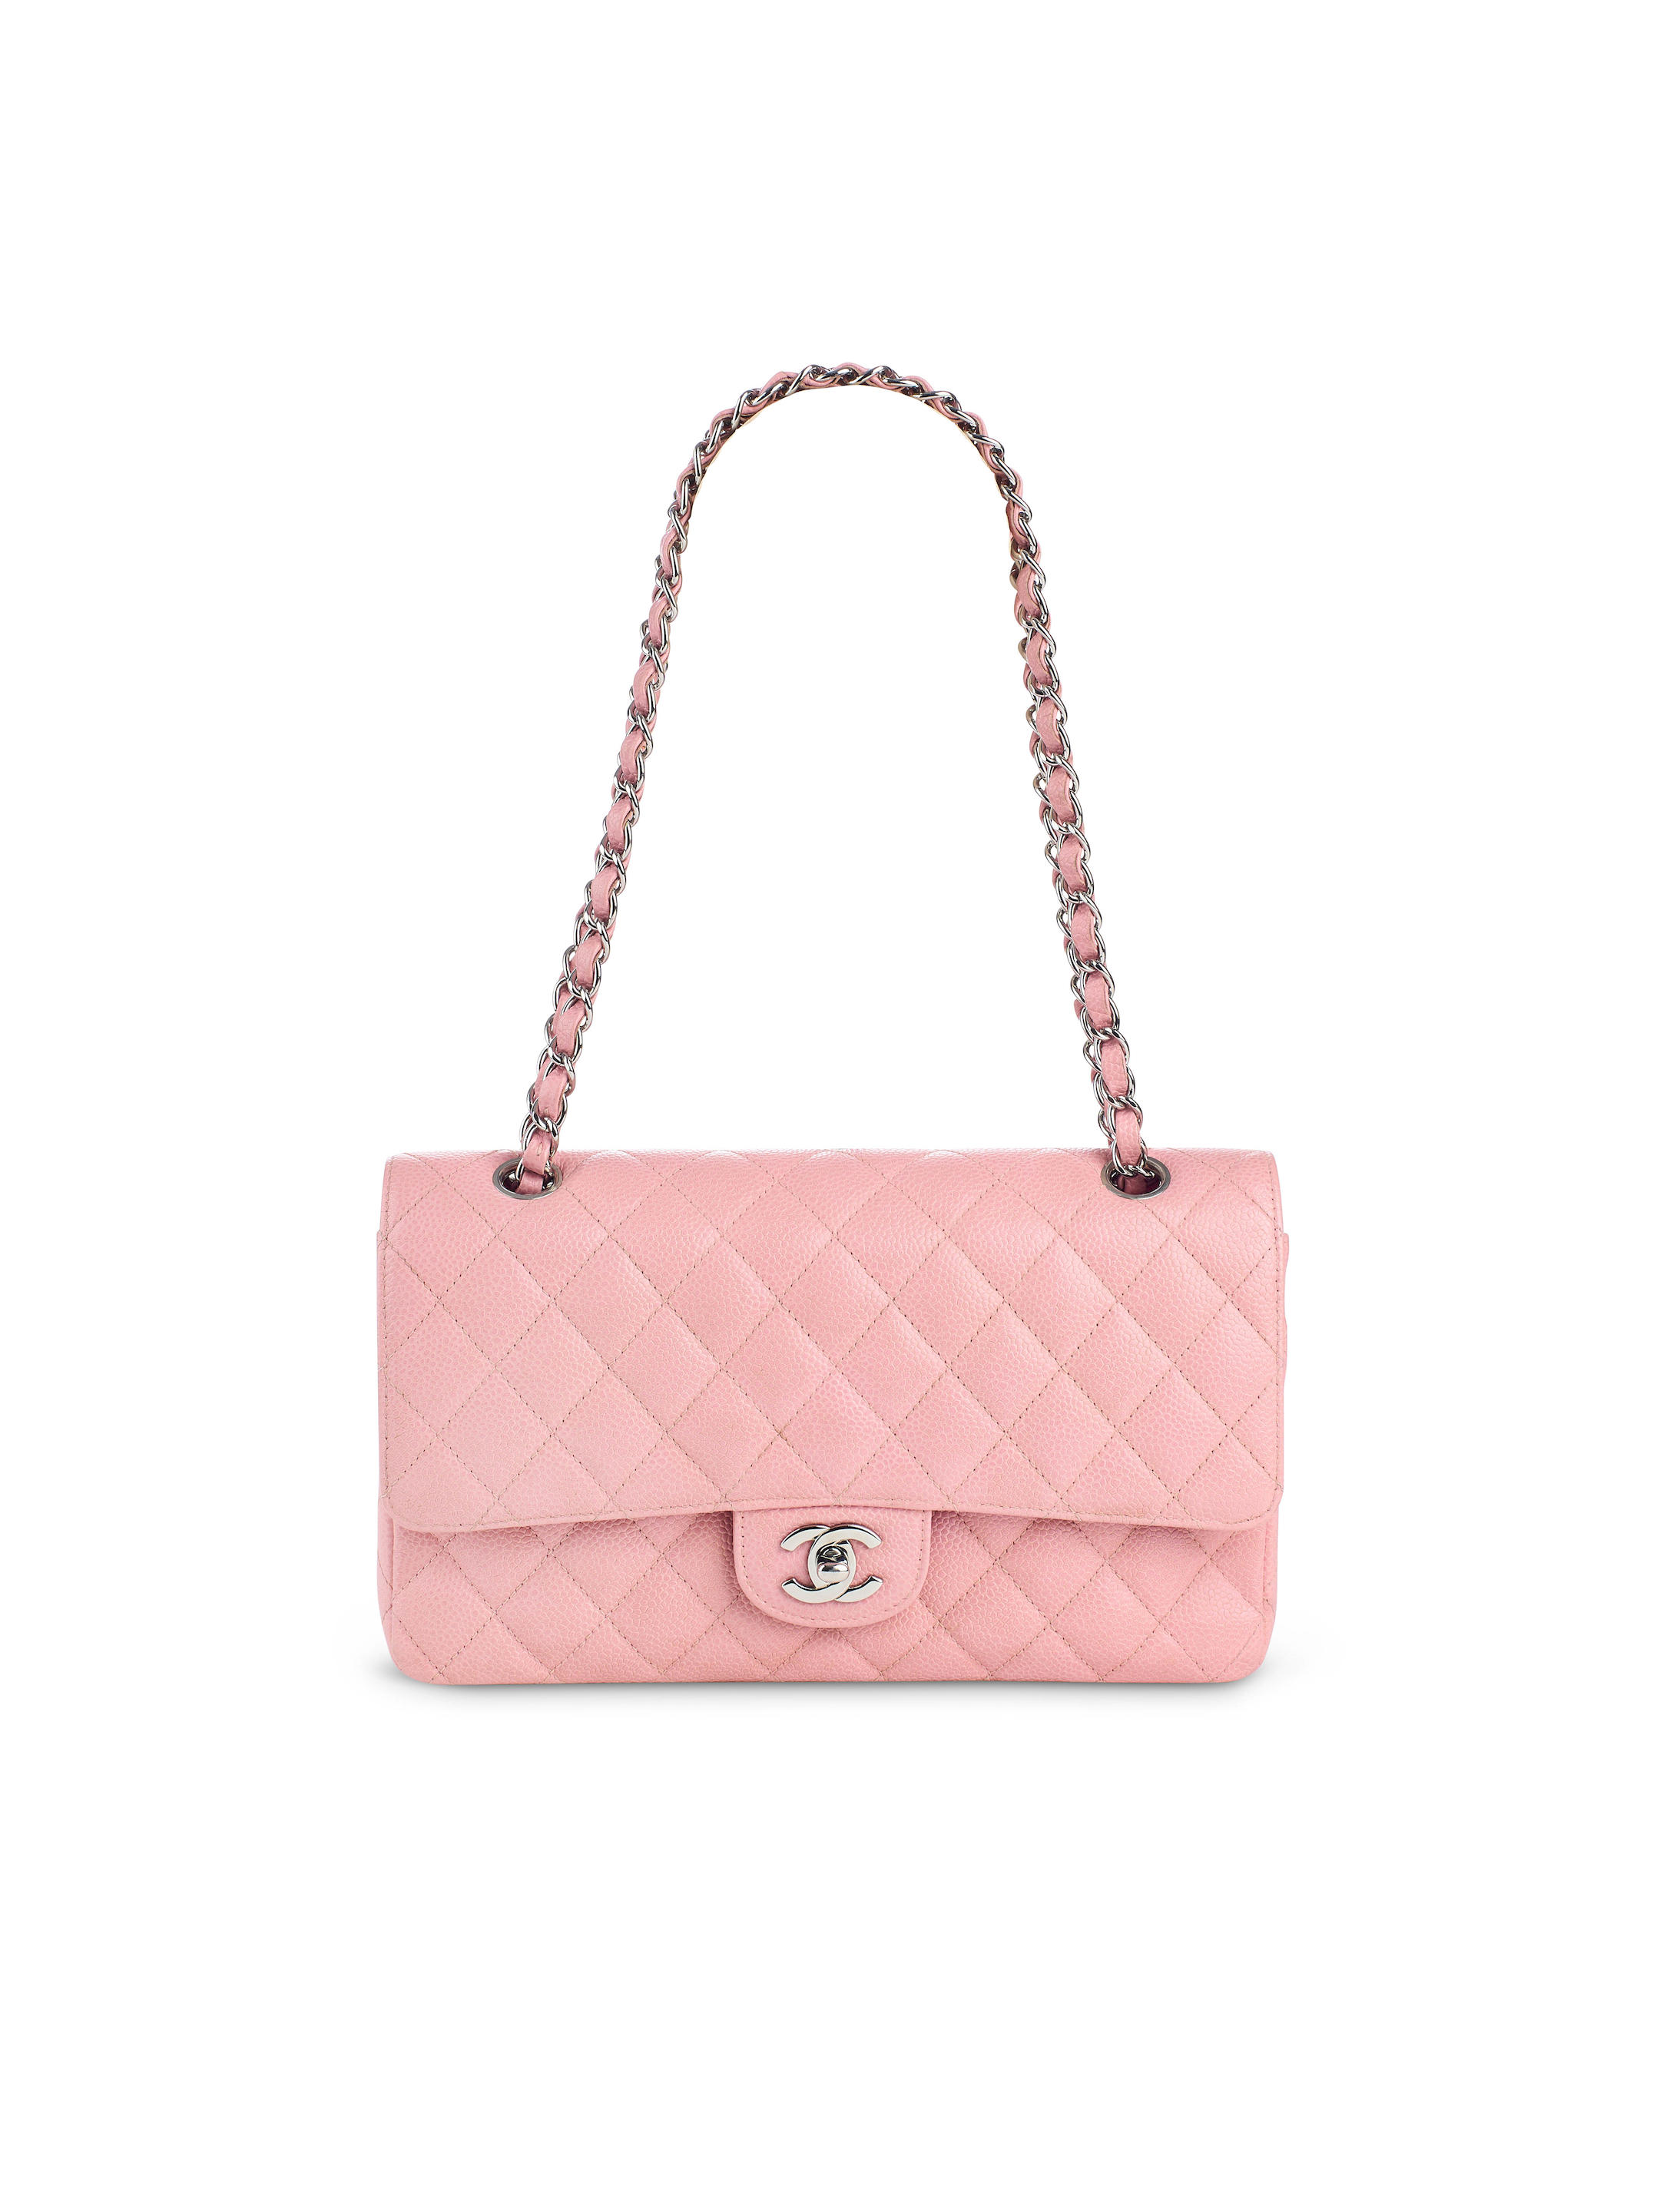 Bonhams : CHANEL PINK QUILTED CAVIAR LEATHER MEDIUM CLASSIC DOUBLE FLAP BAG  IN SILVER TONE HARDWARE (includes serial sticker, authenticity card, original  dust bag)